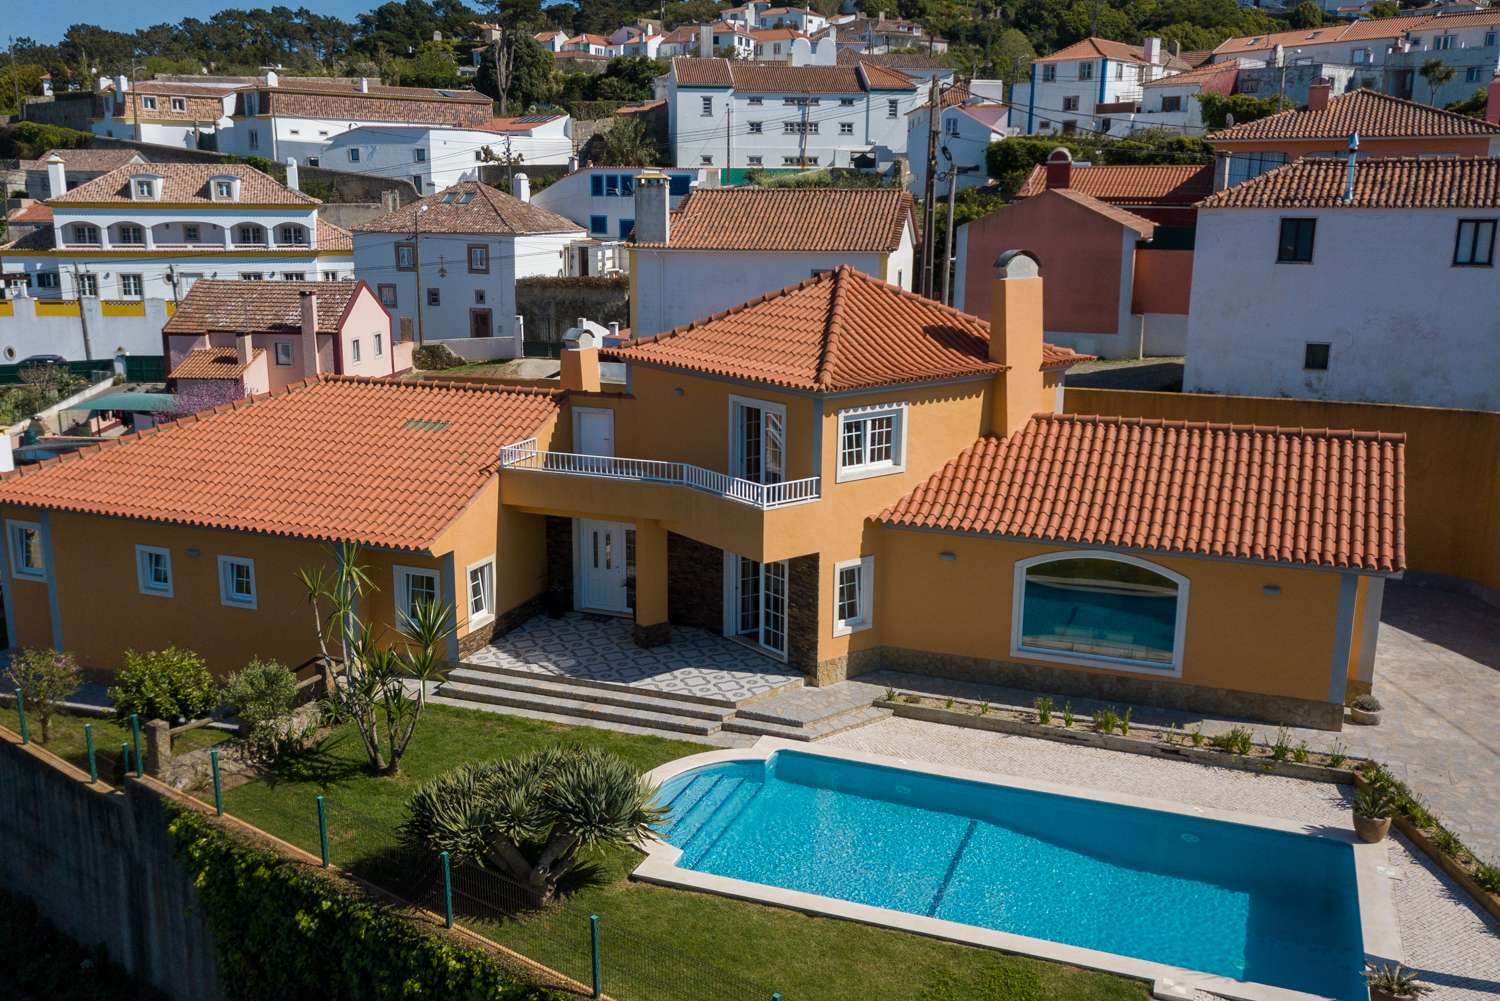 3-bedroom house with garden and swimming pool in Penedo, Colares